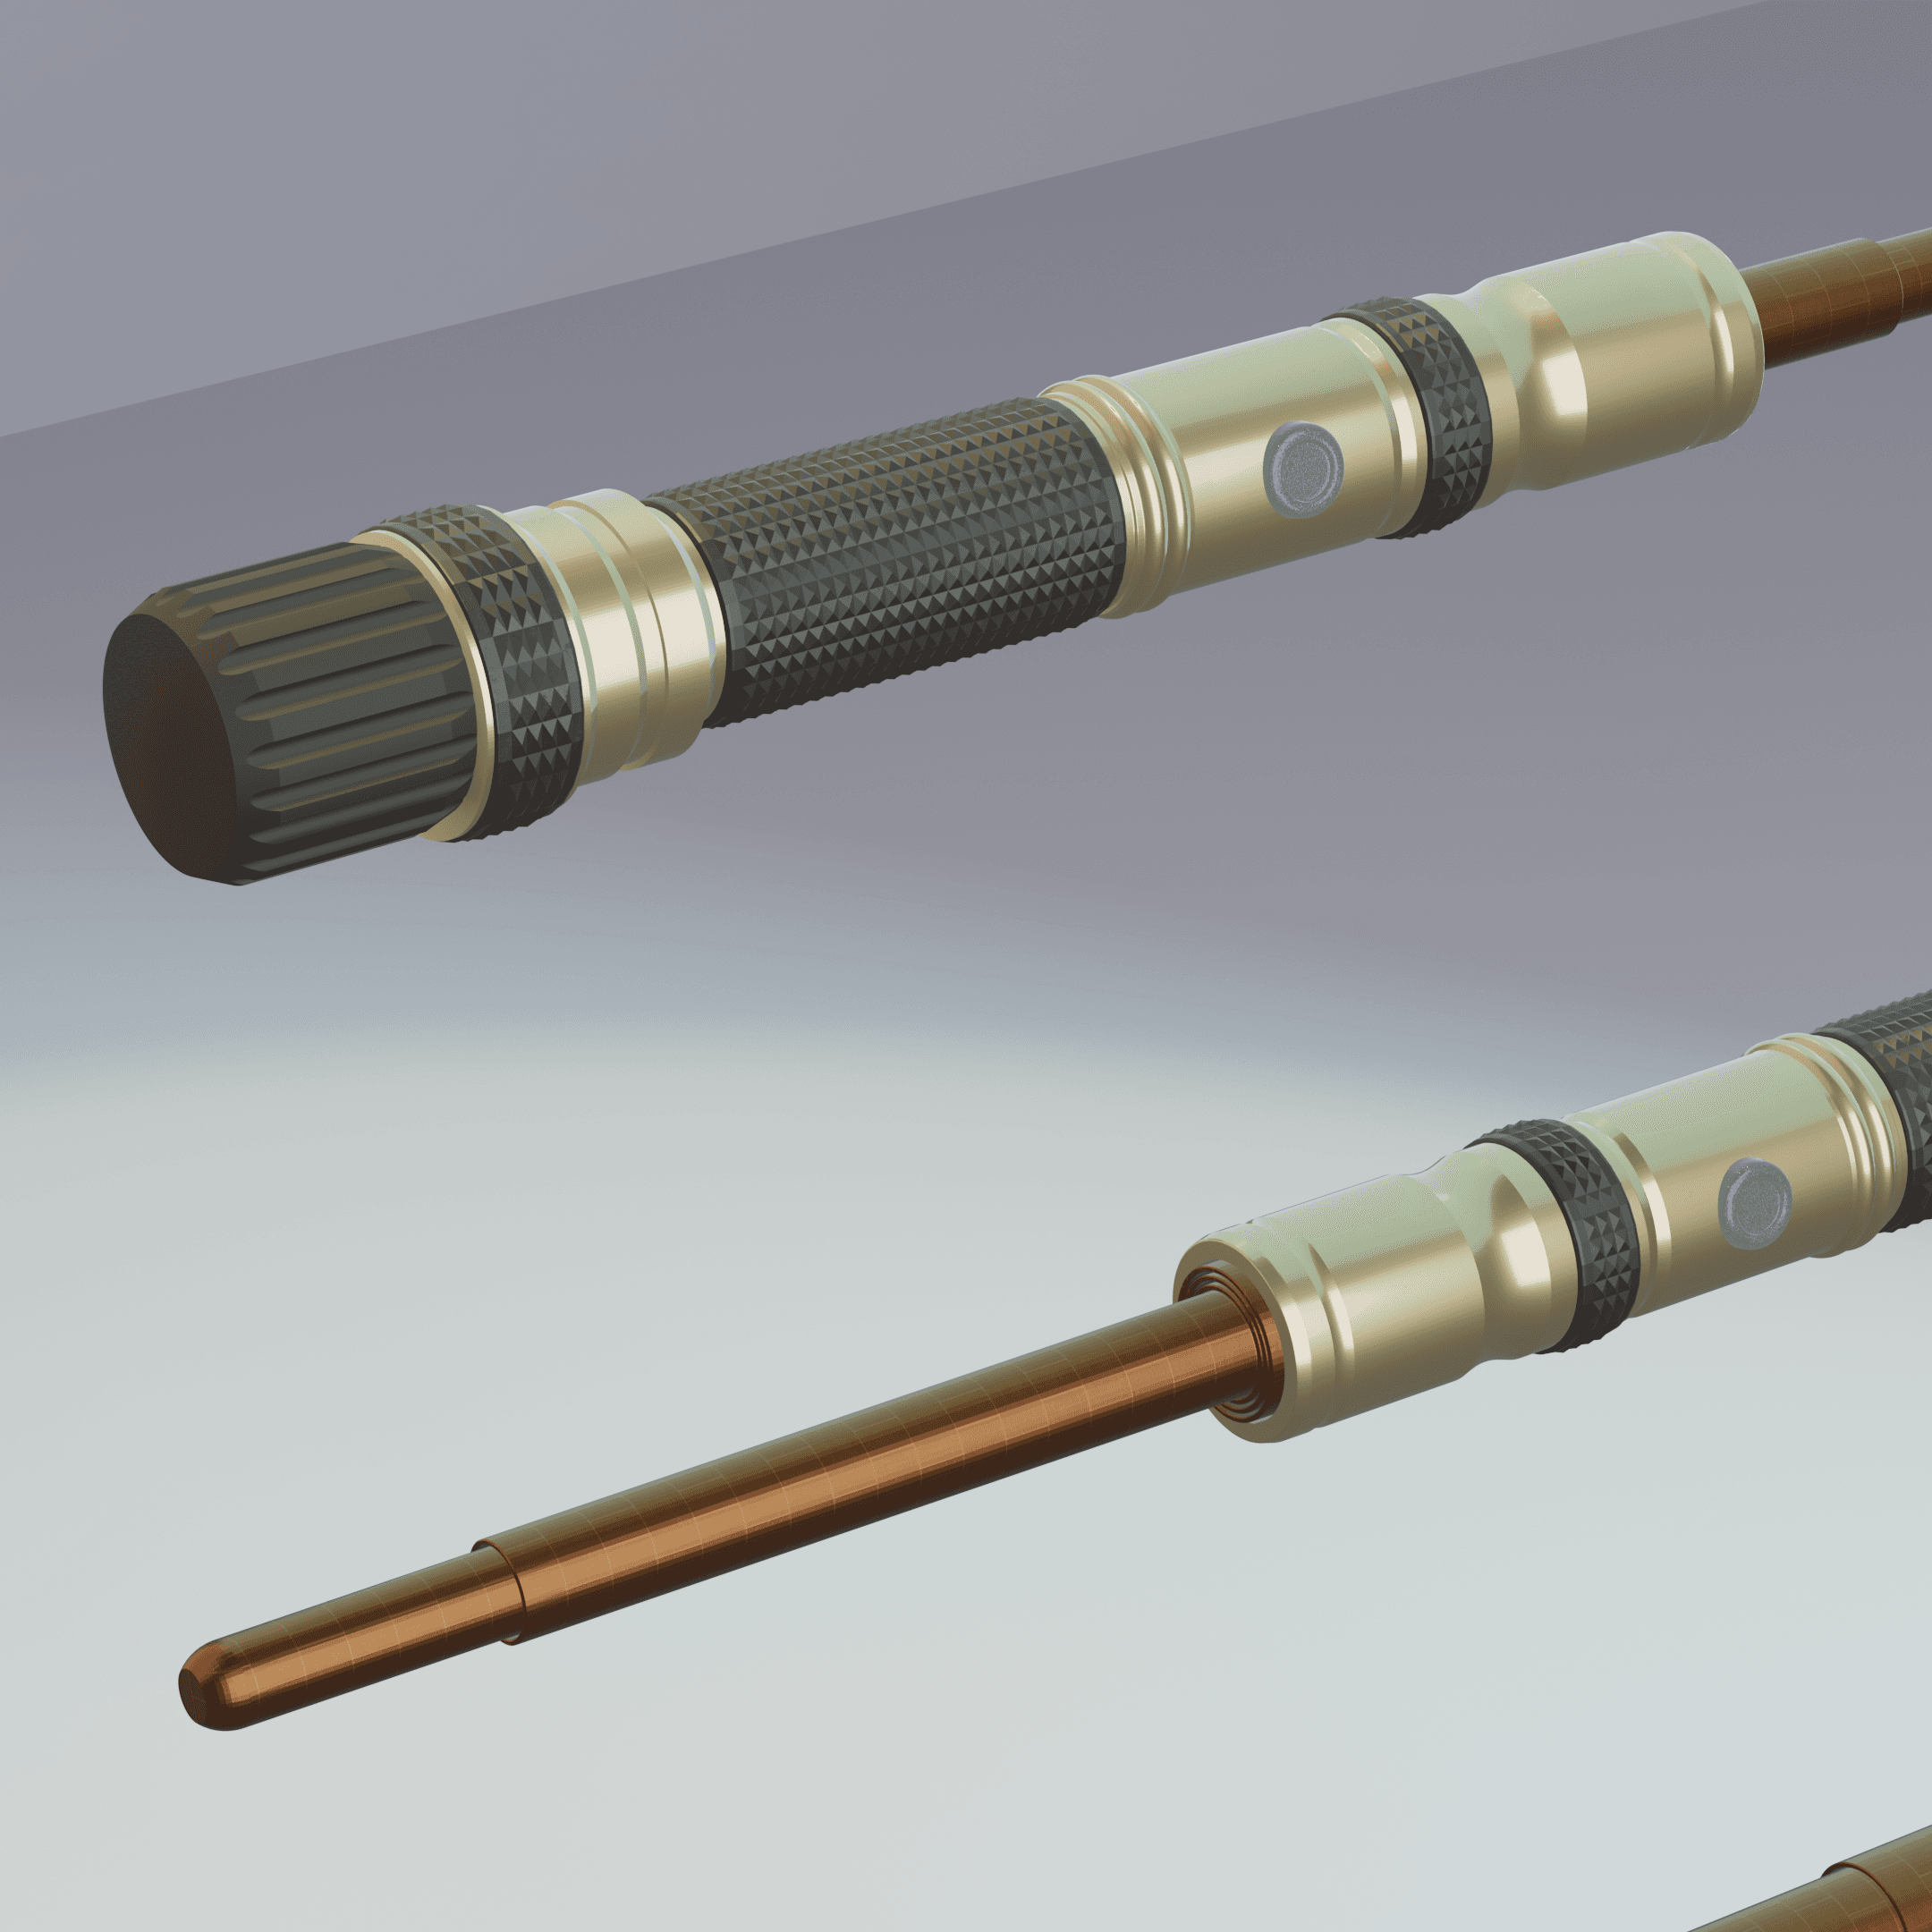 Print in Place Collapsing Jedi Lightsaber Concept 5 3d model